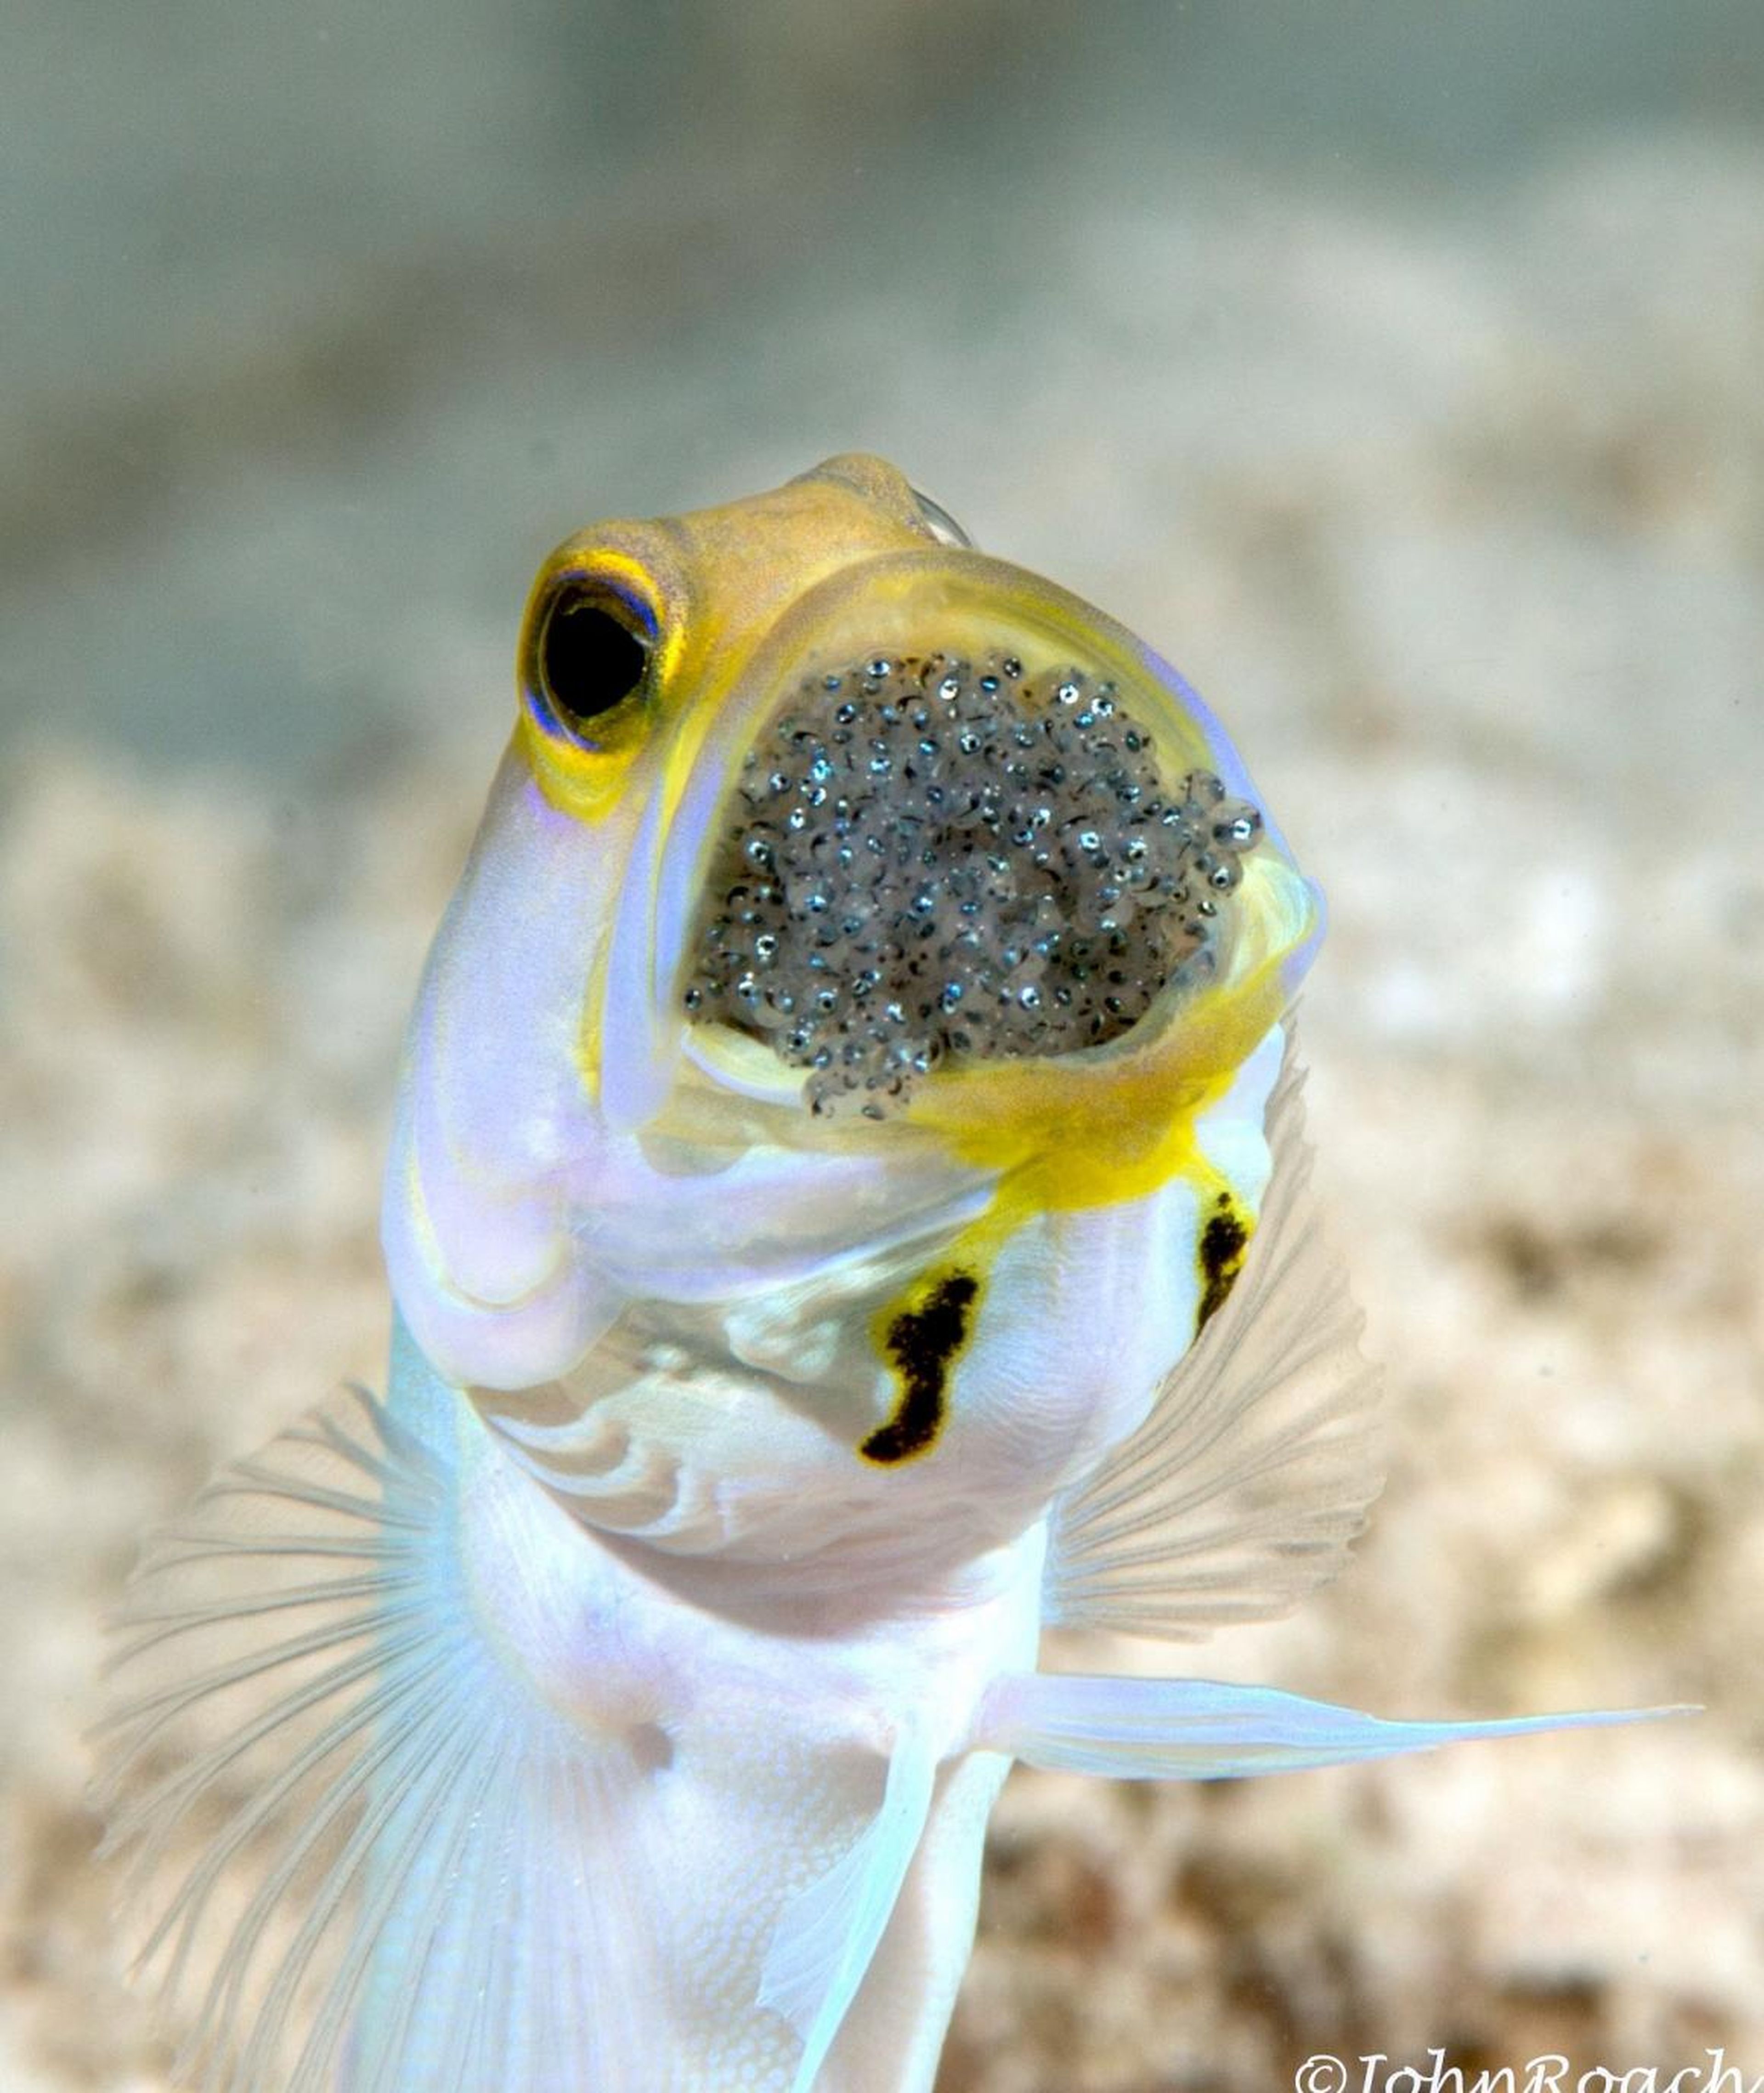 John Roach captured a close-up image of a Yellowhead Jawfish in the Caribbean waters of the Netherlands Antilles.